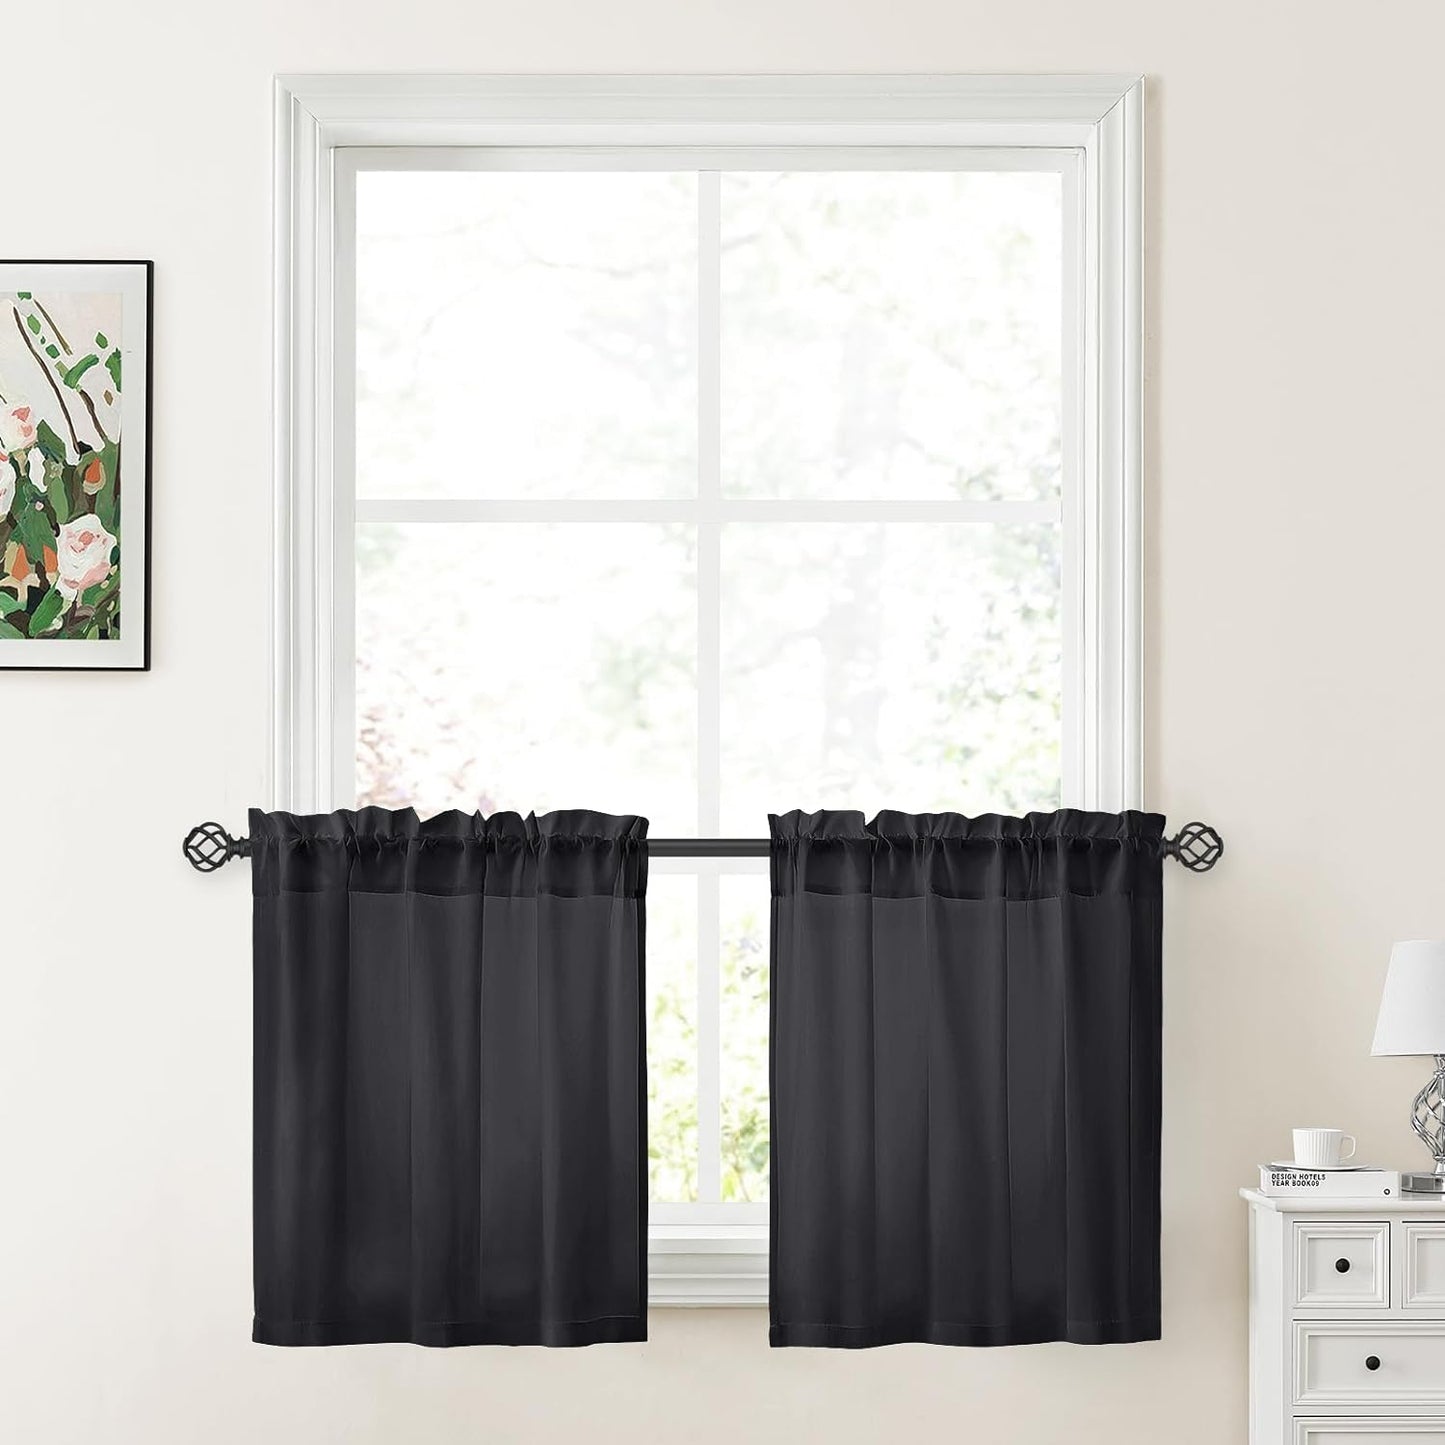 HOMEIDEAS Non-See-Through White Privacy Sheer Curtains 52 X 84 Inches Long 2 Panels Semi Sheer Curtains Light Filtering Window Curtains Drapes for Bedroom Living Room  HOMEIDEAS Black W30" X L24" 